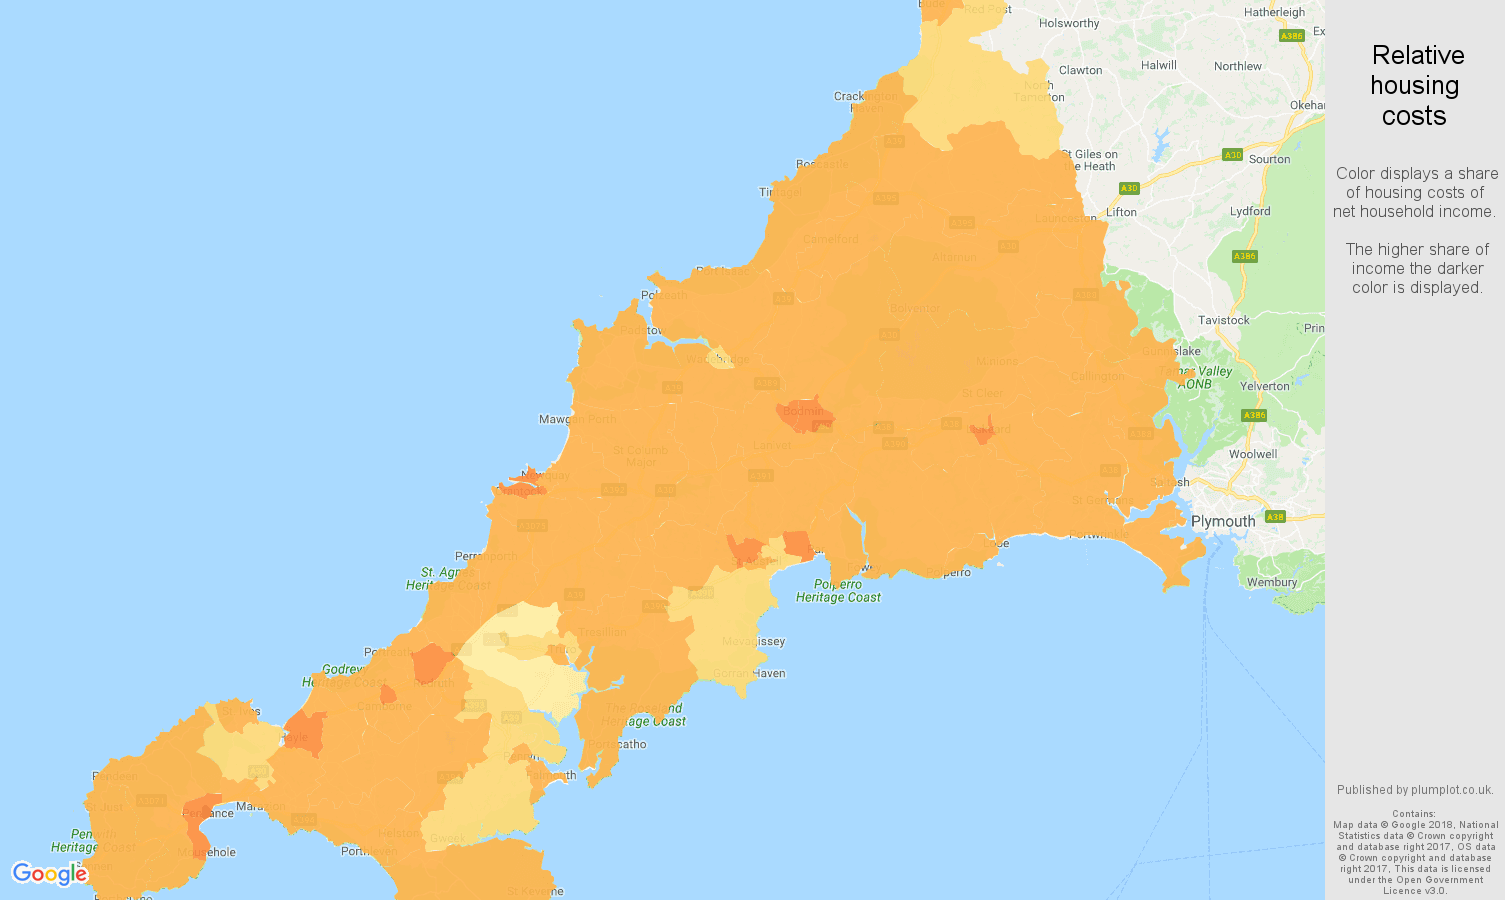 Cornwall relative housing costs map